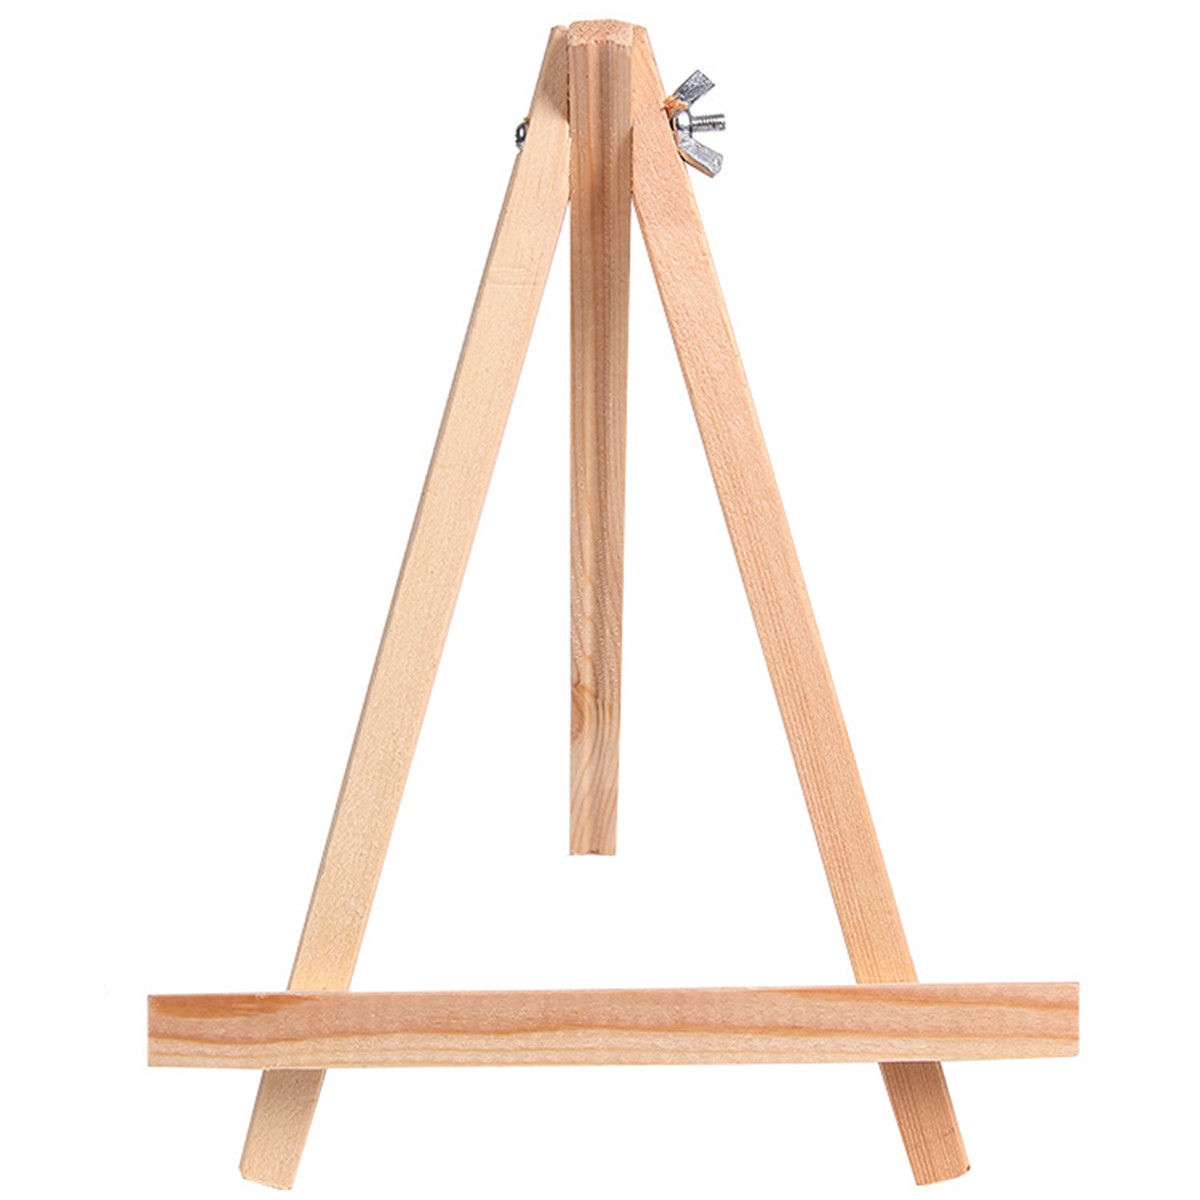 

Small Wooden Timber Easel Photo Art Painting Display Rack Stand Holder 24cm